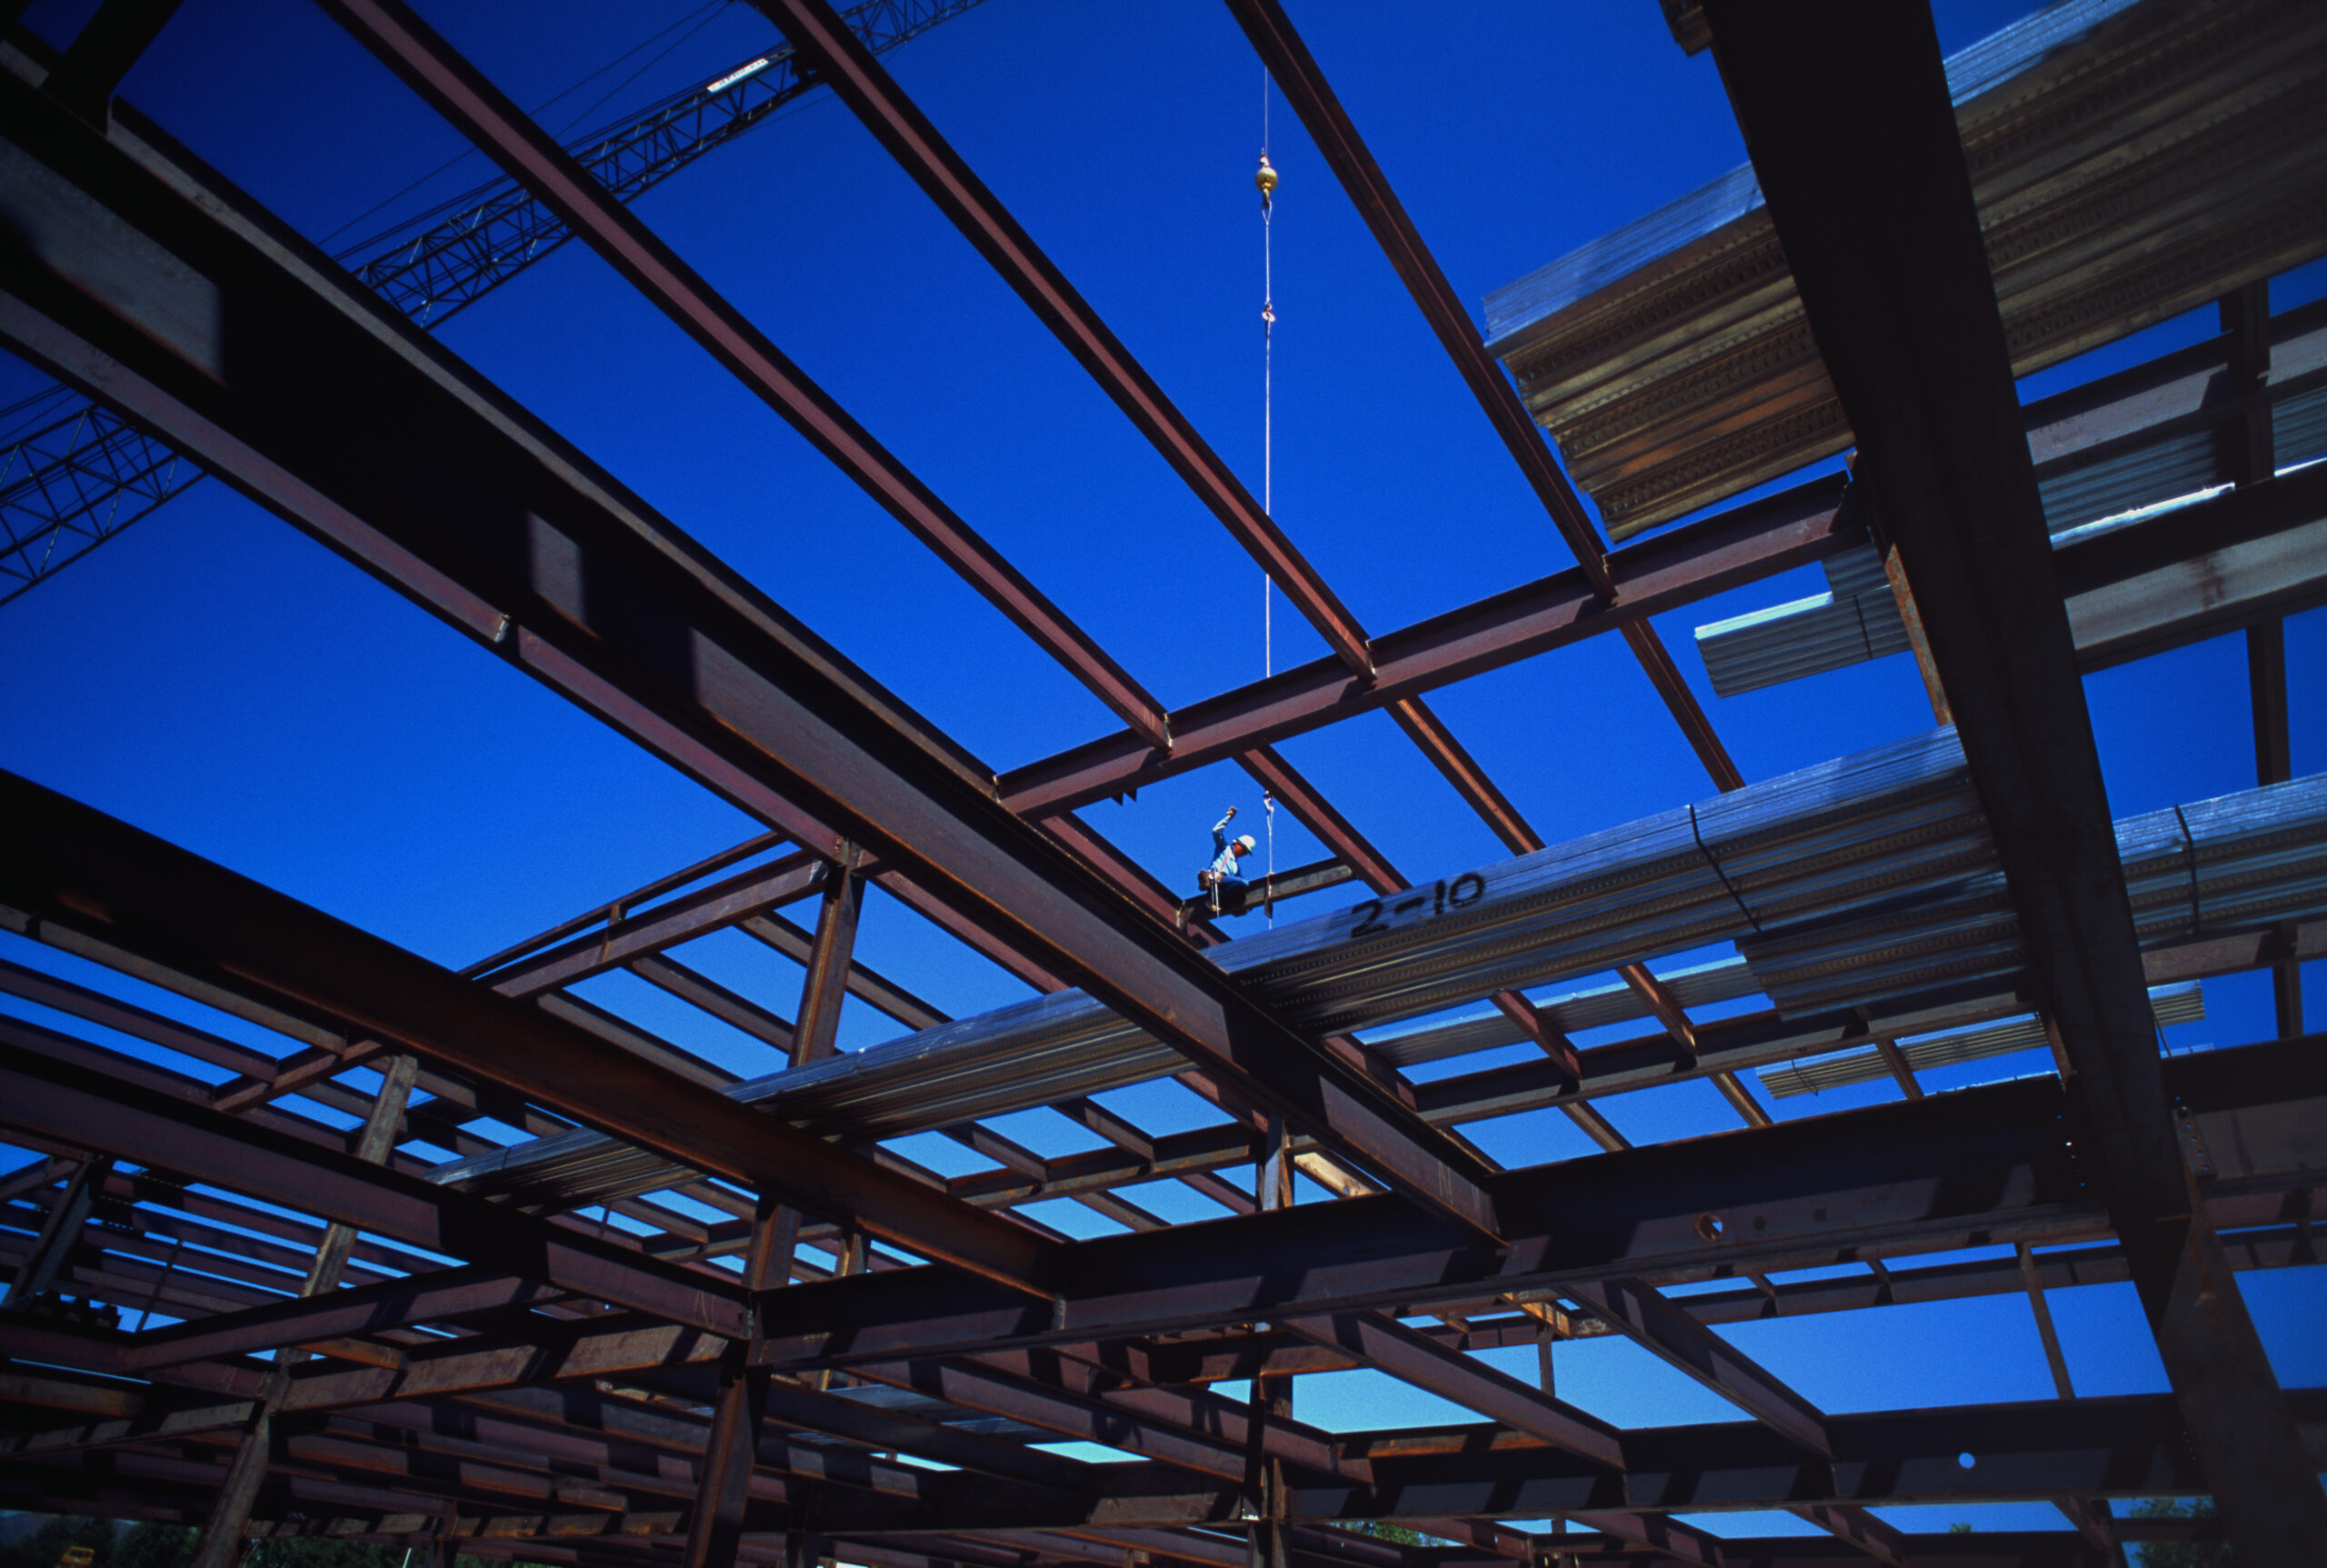 Steel beams that will eventually form the ceiling of a building criss-cross across a clear blue sky.